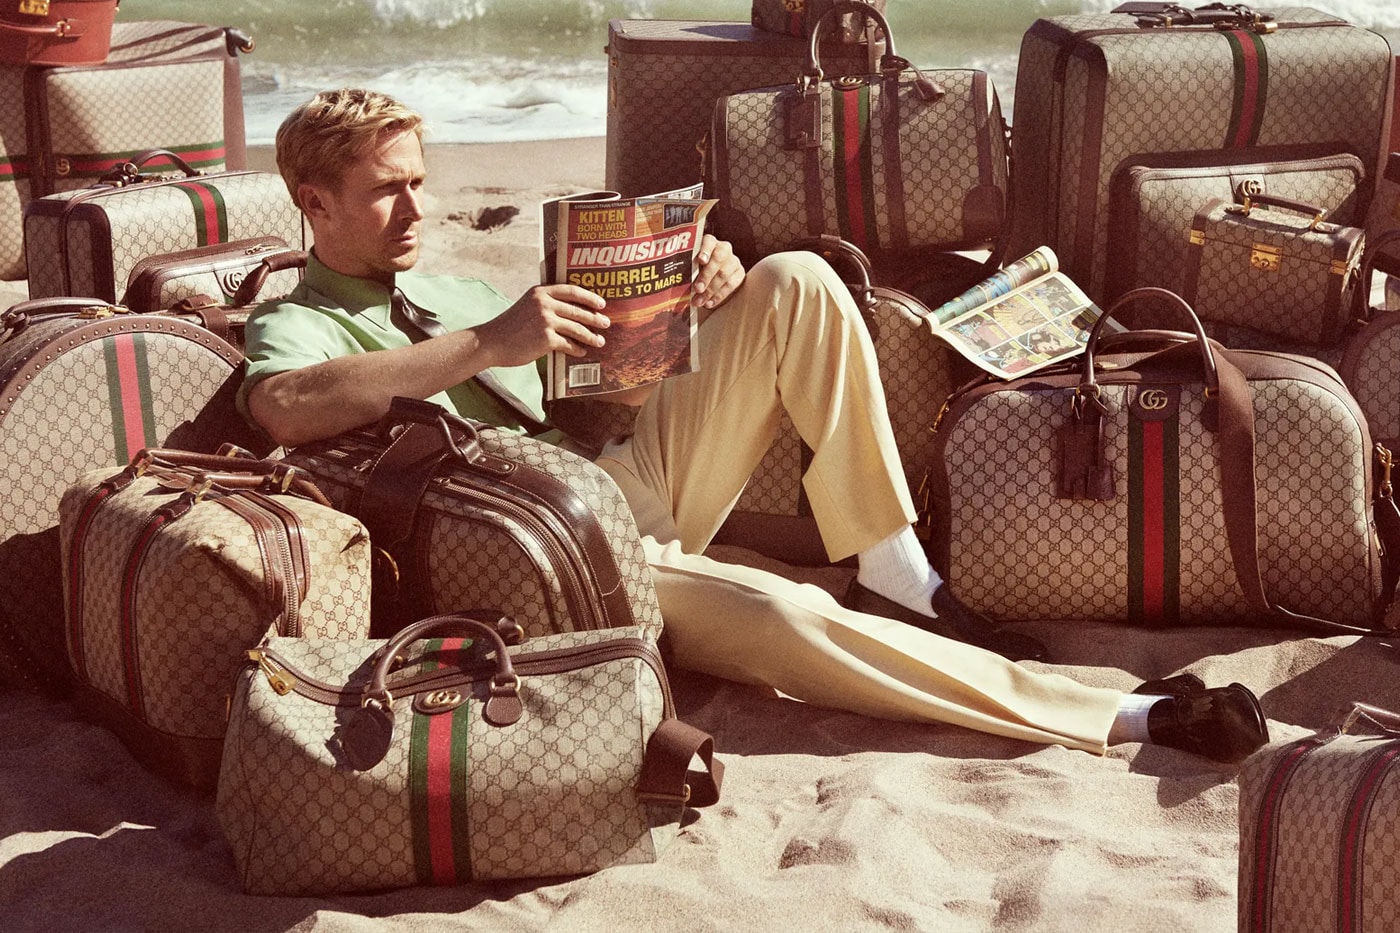 Ryan Gosling Is Gucci's Latest Muse Travel Luggage Campaign harry styles jared leto lana del rey Valigeria alessandro michele